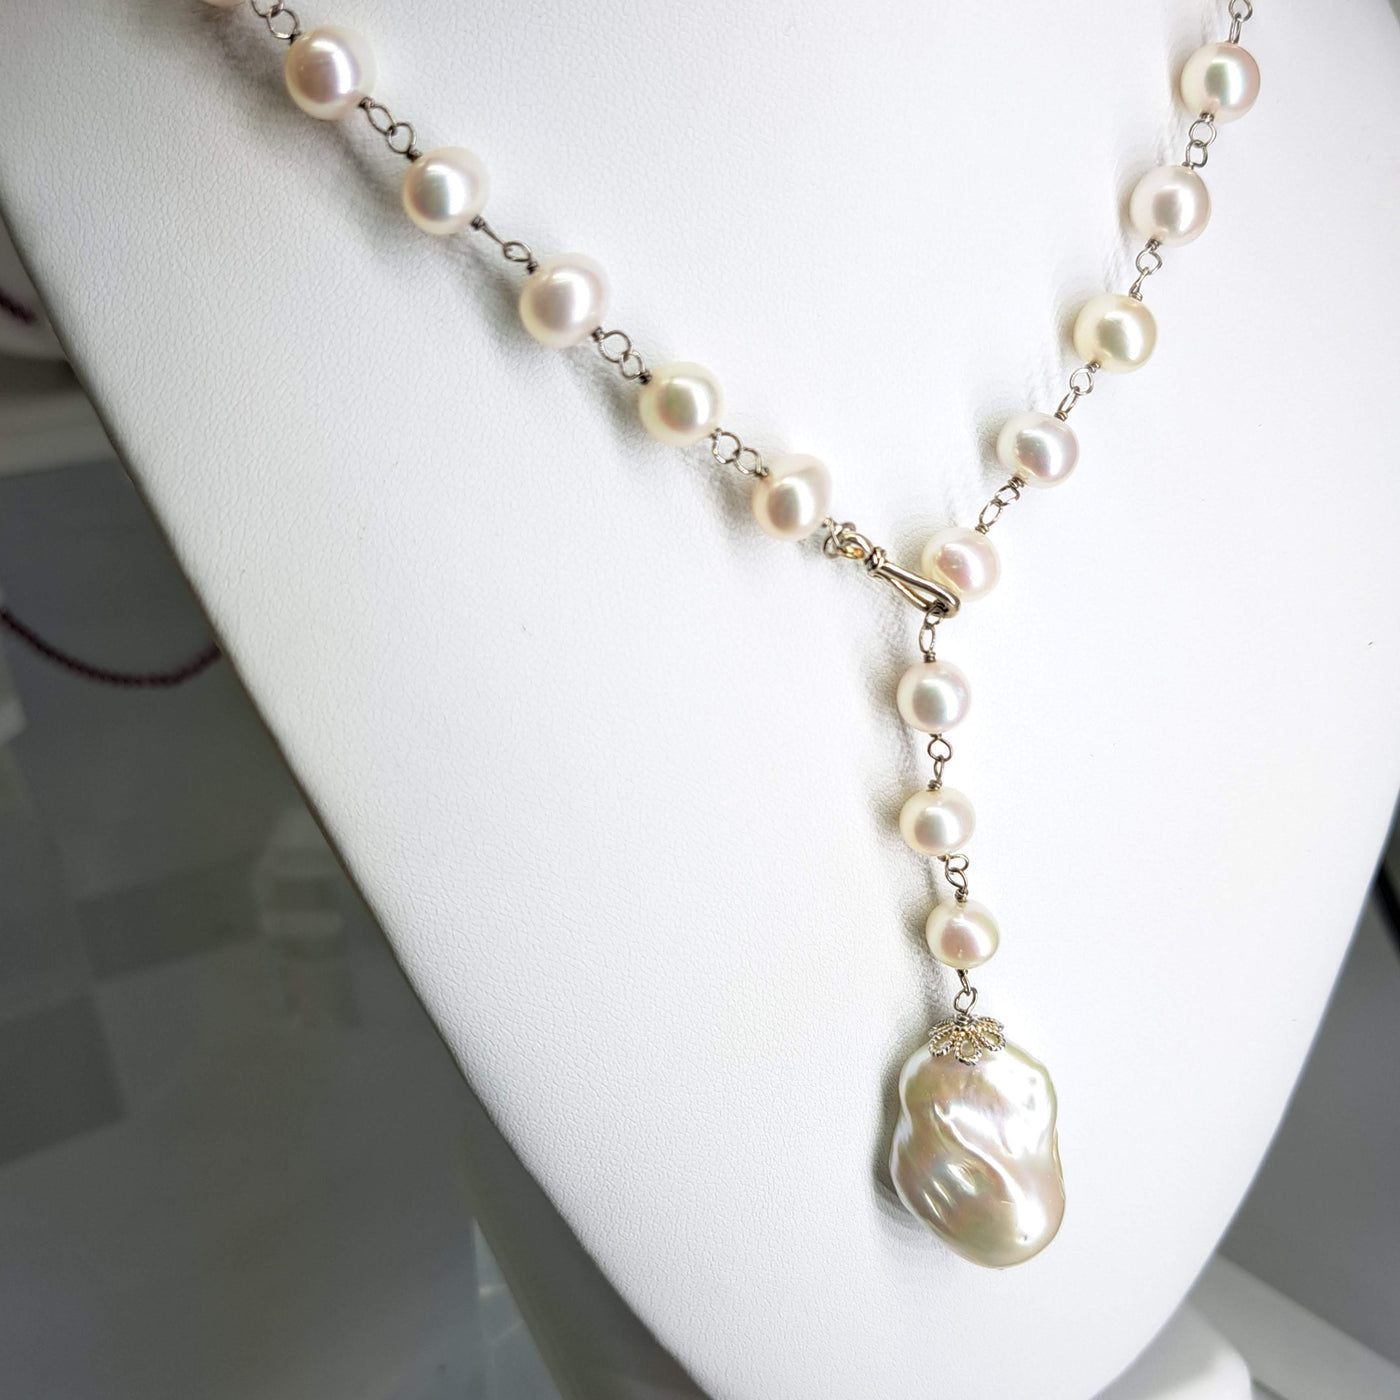 "Goin' for Baroque" Pendant Necklace - White Baroque, Hand-Rosary-Knotted Pearl Lariat, Sterling